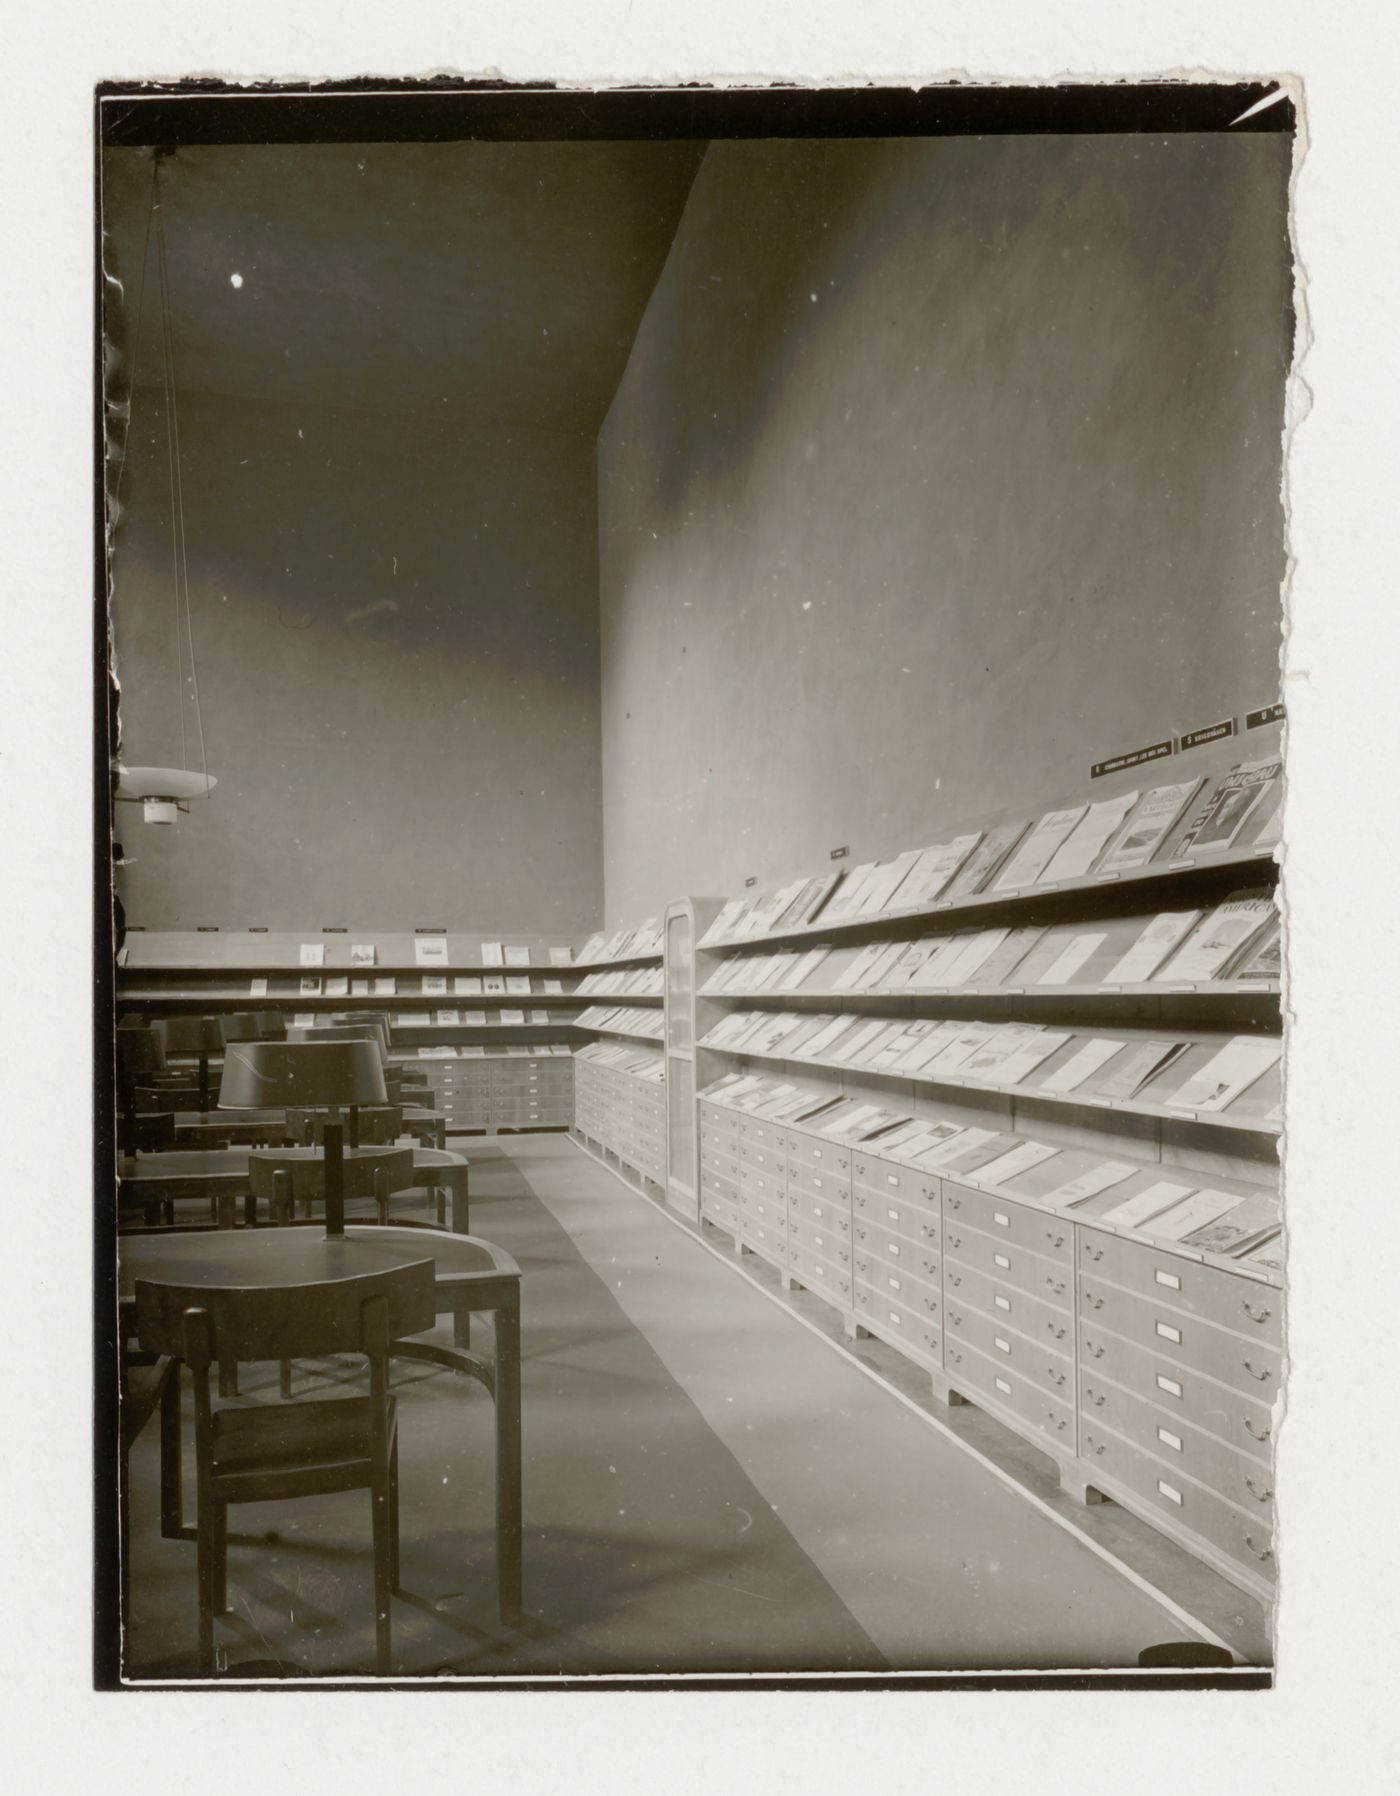 Interior view of the periodical room of Stockholm Public Library showing the racks for periodicals and filing cabinets, 51-55 Odengatan, Stockholm